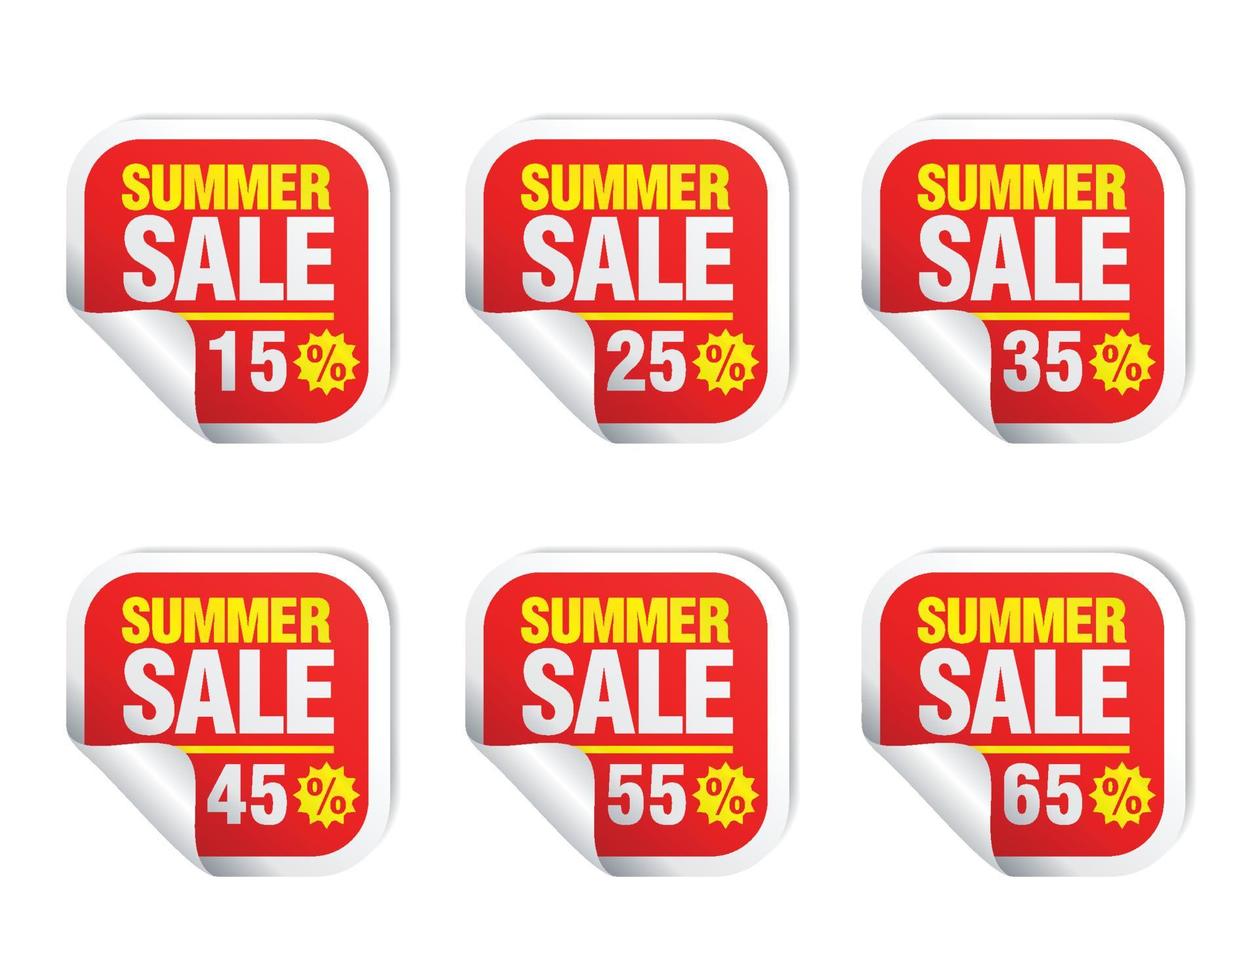 Summer Sale red sticker icon set. Sale 15, 25, 35, 45, 55, 65 percent off vector